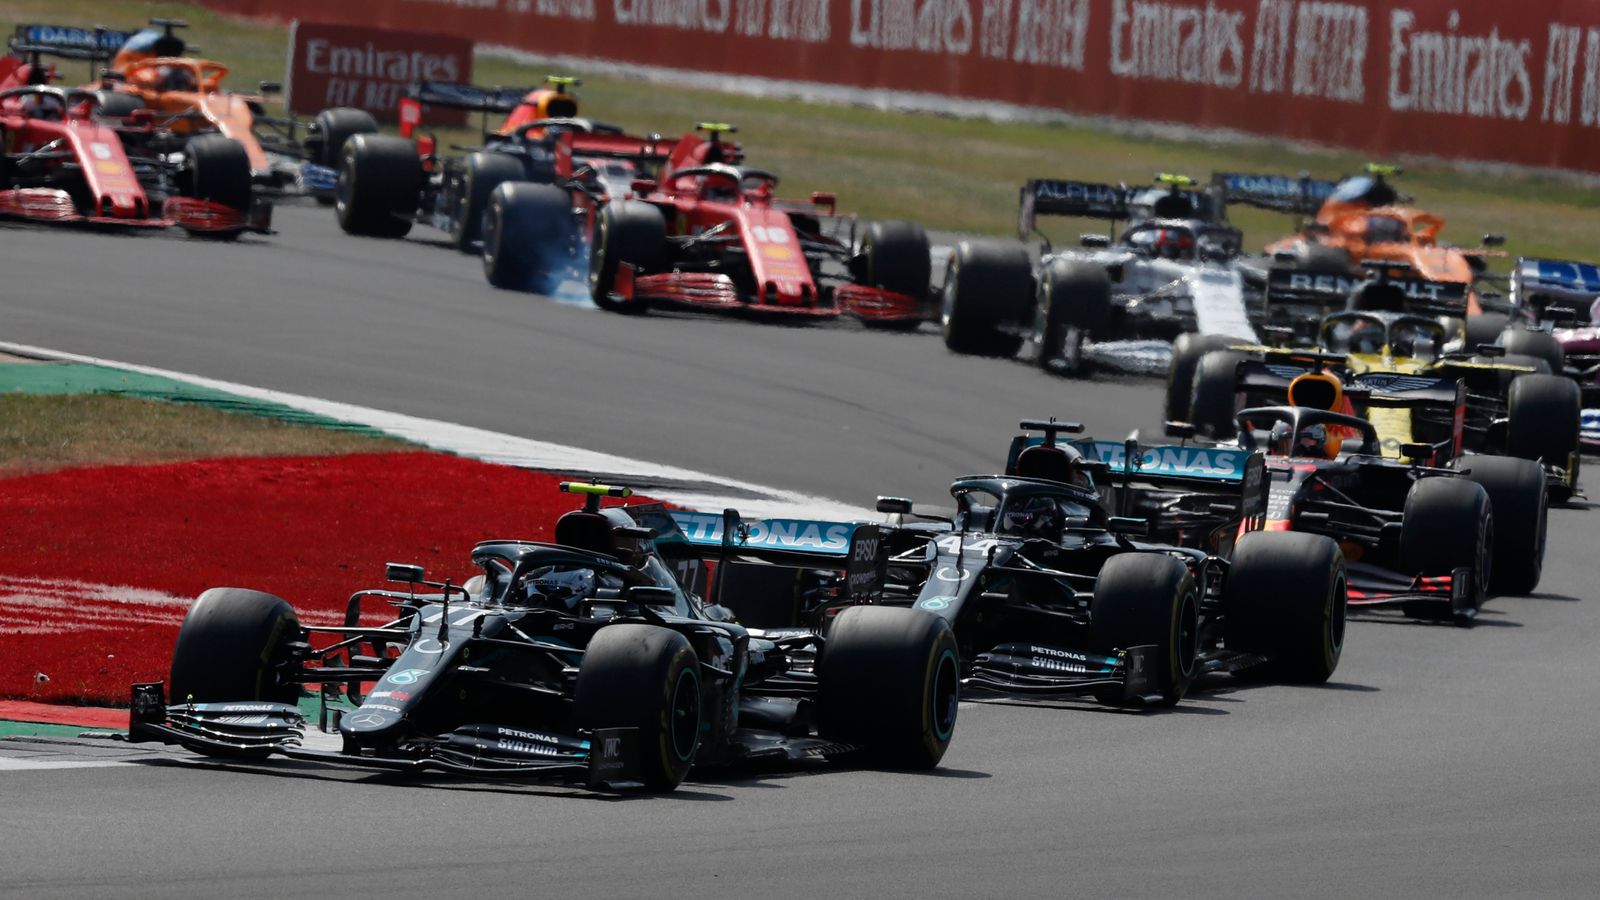 British GP F1 Sprint makes debut as Silverstone hosts new weekend format, all live on Sky Sports F1 F1 News